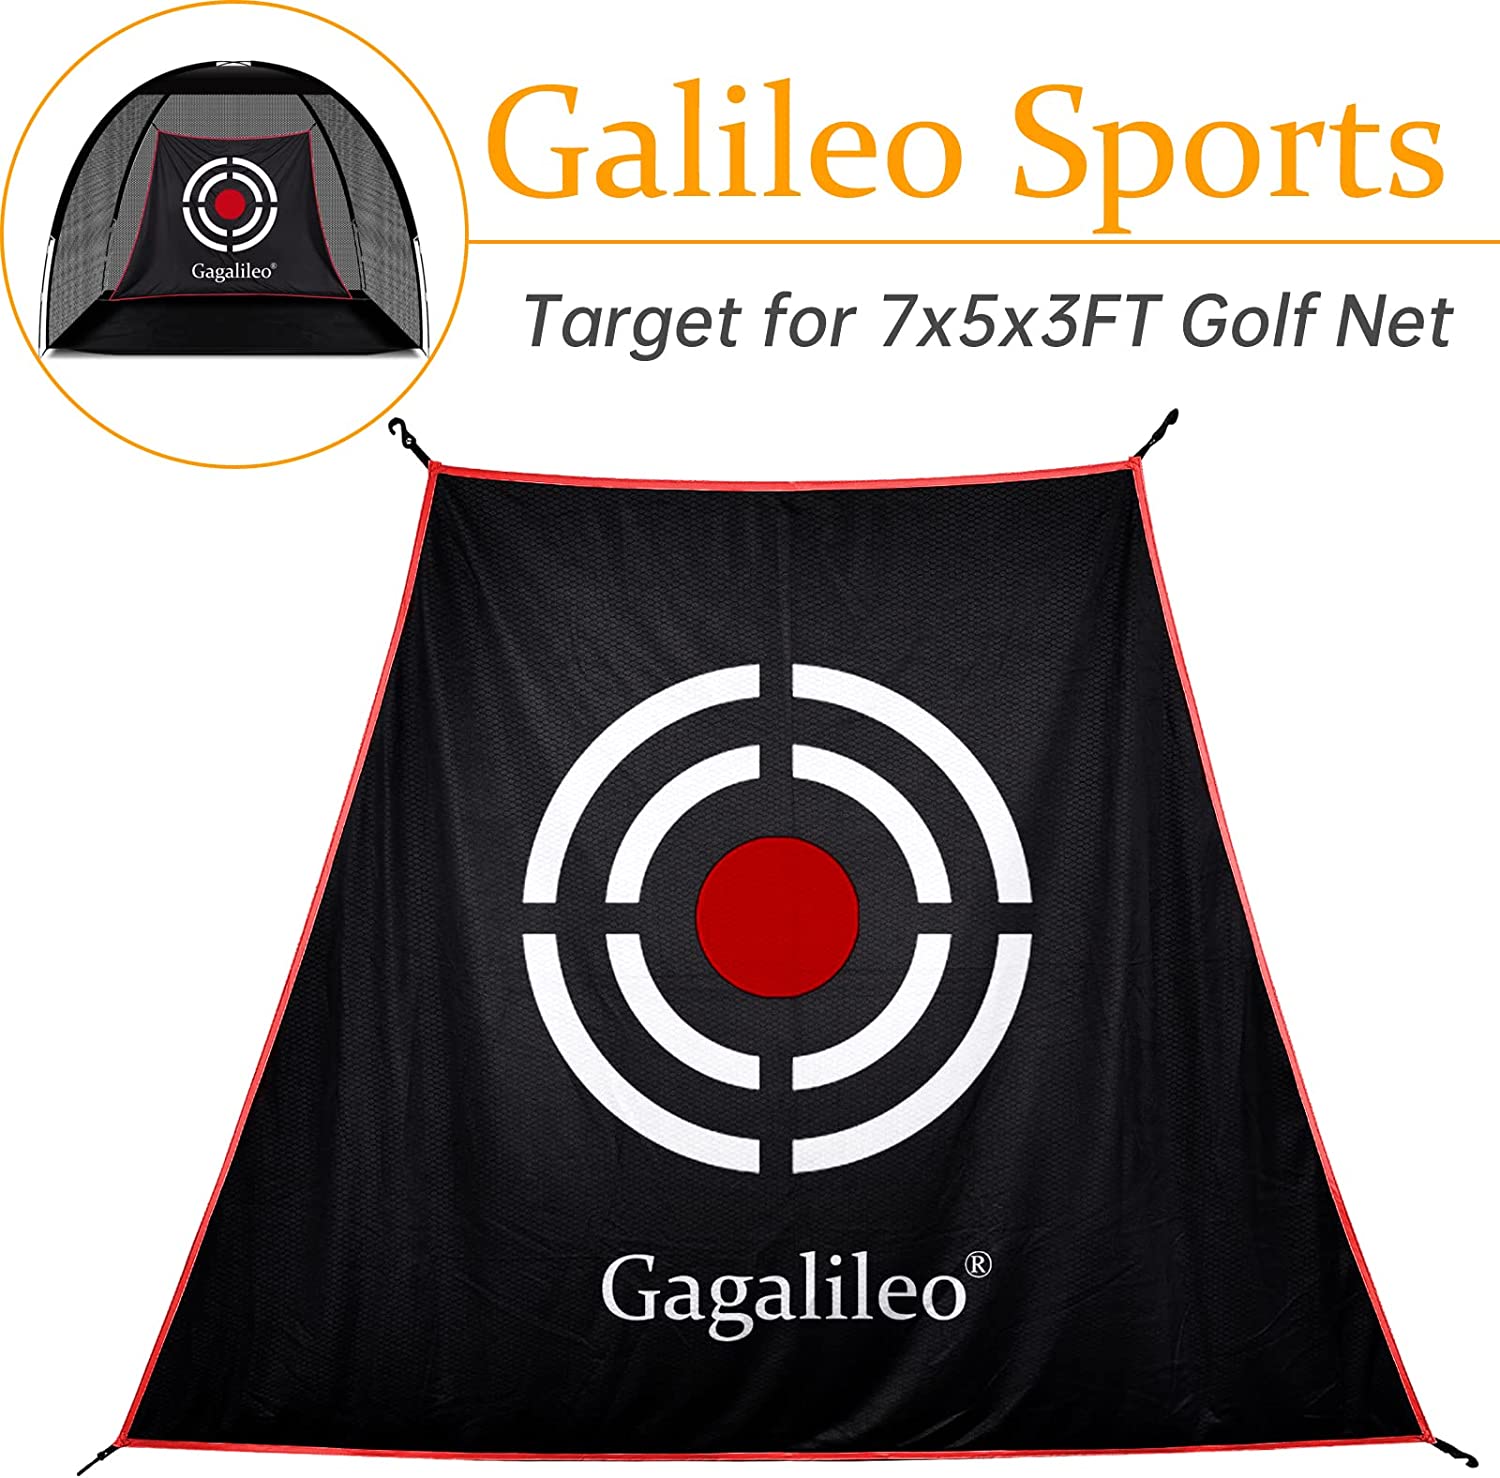 Golf Target Replacement for the Galileo Golf Net | for 7X5X3FT  Golf practice net |Galileo Sports